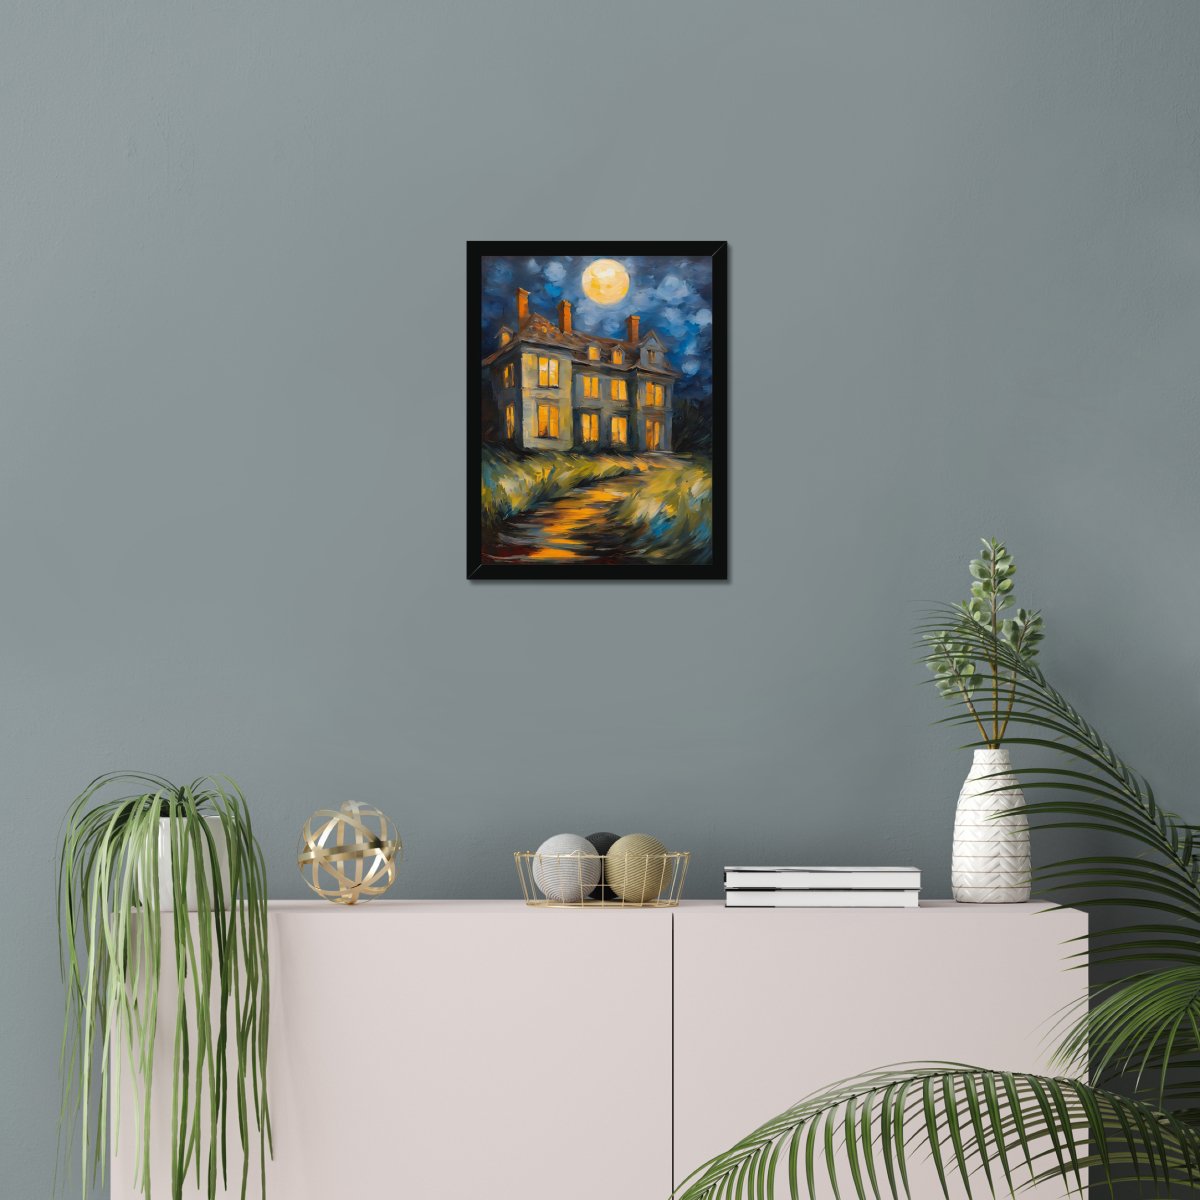 Wicked house - Art print - Poster - Ever colorful